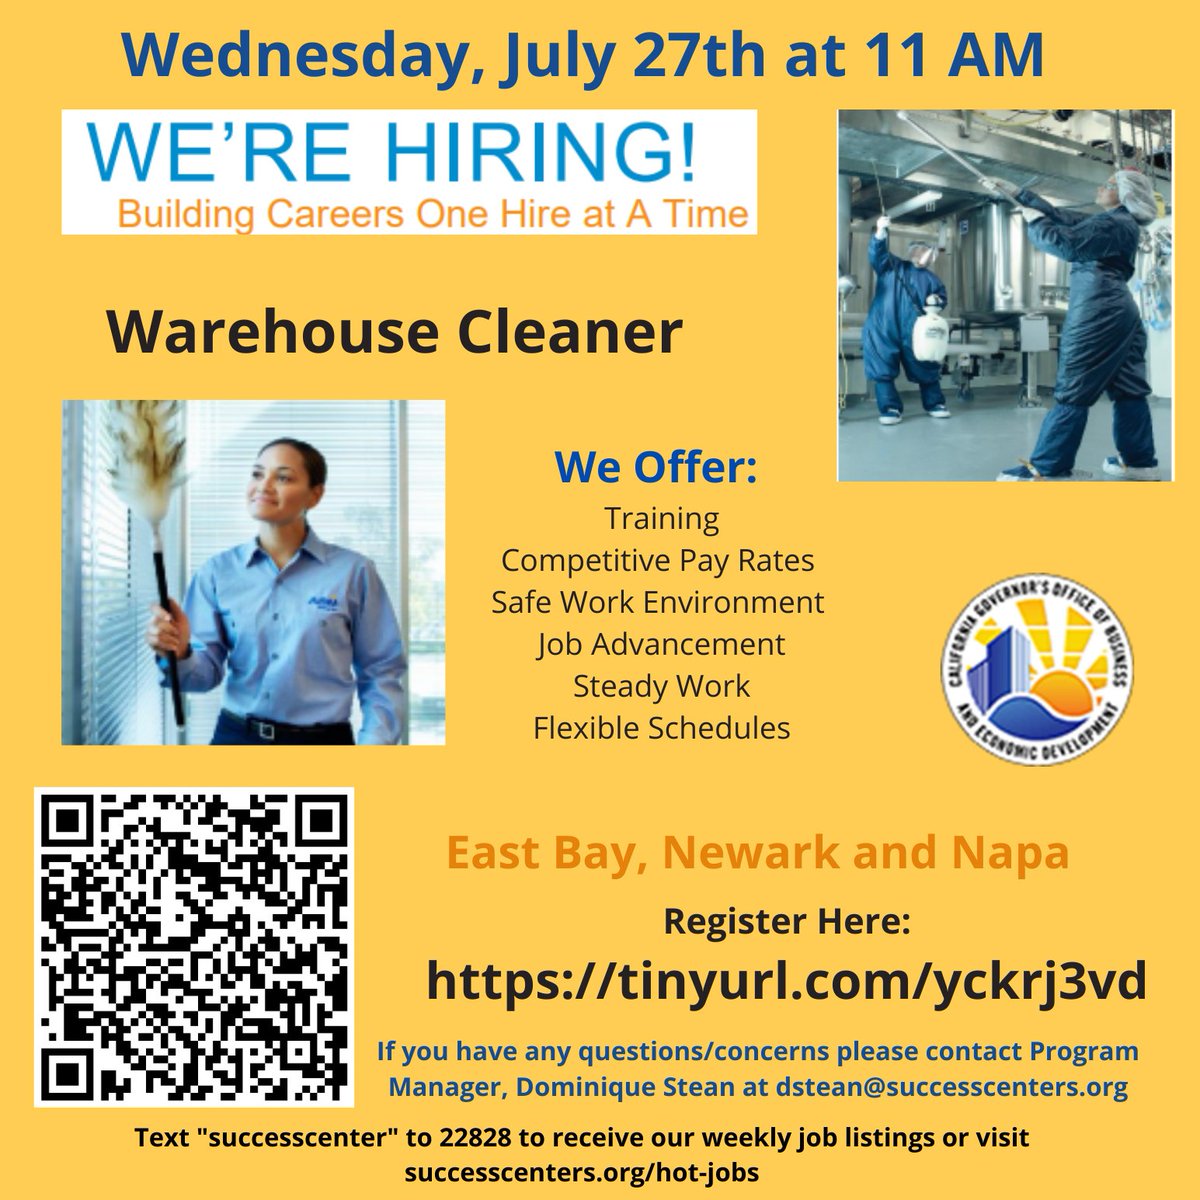 Job opportunity as a Warehouse Cleaner with ABM though #successcenters. Please contact your DPO for a referral or more information. #ACPD #Probation #Alamedacounty #jobopportunities #warehousecleaner
#jobtraining